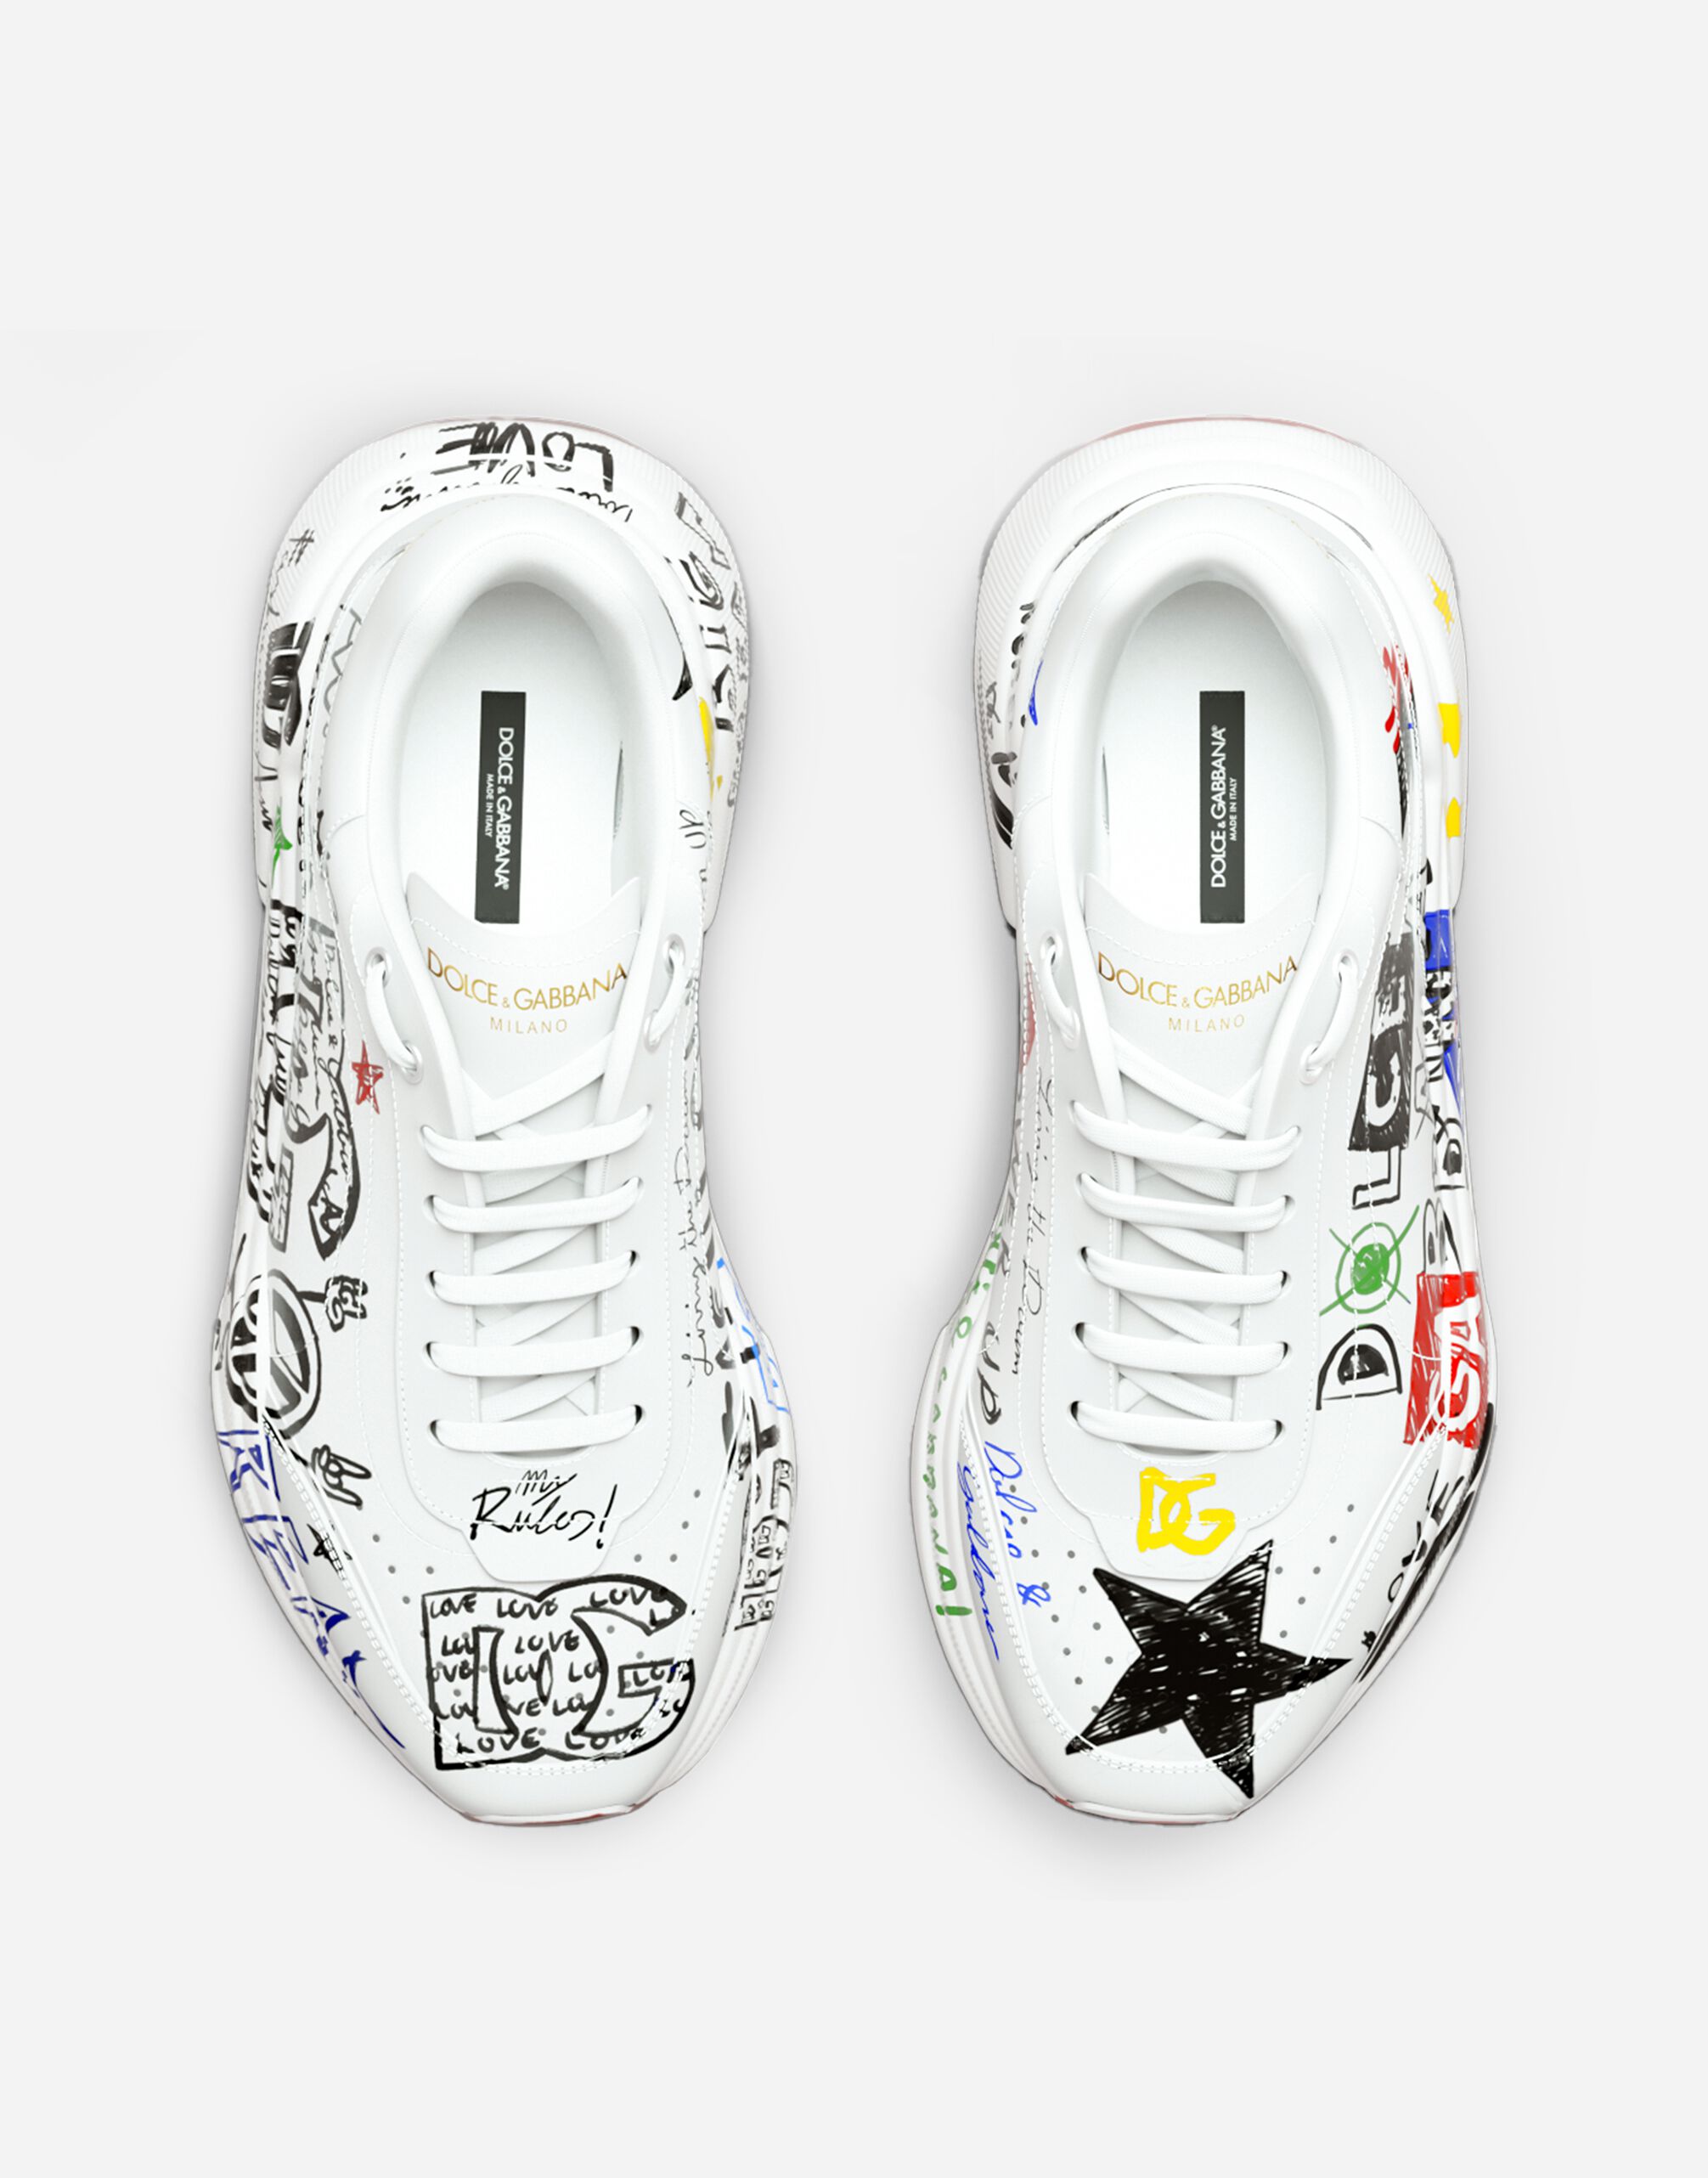 Share 190+ sneakers dolce and gabbana best